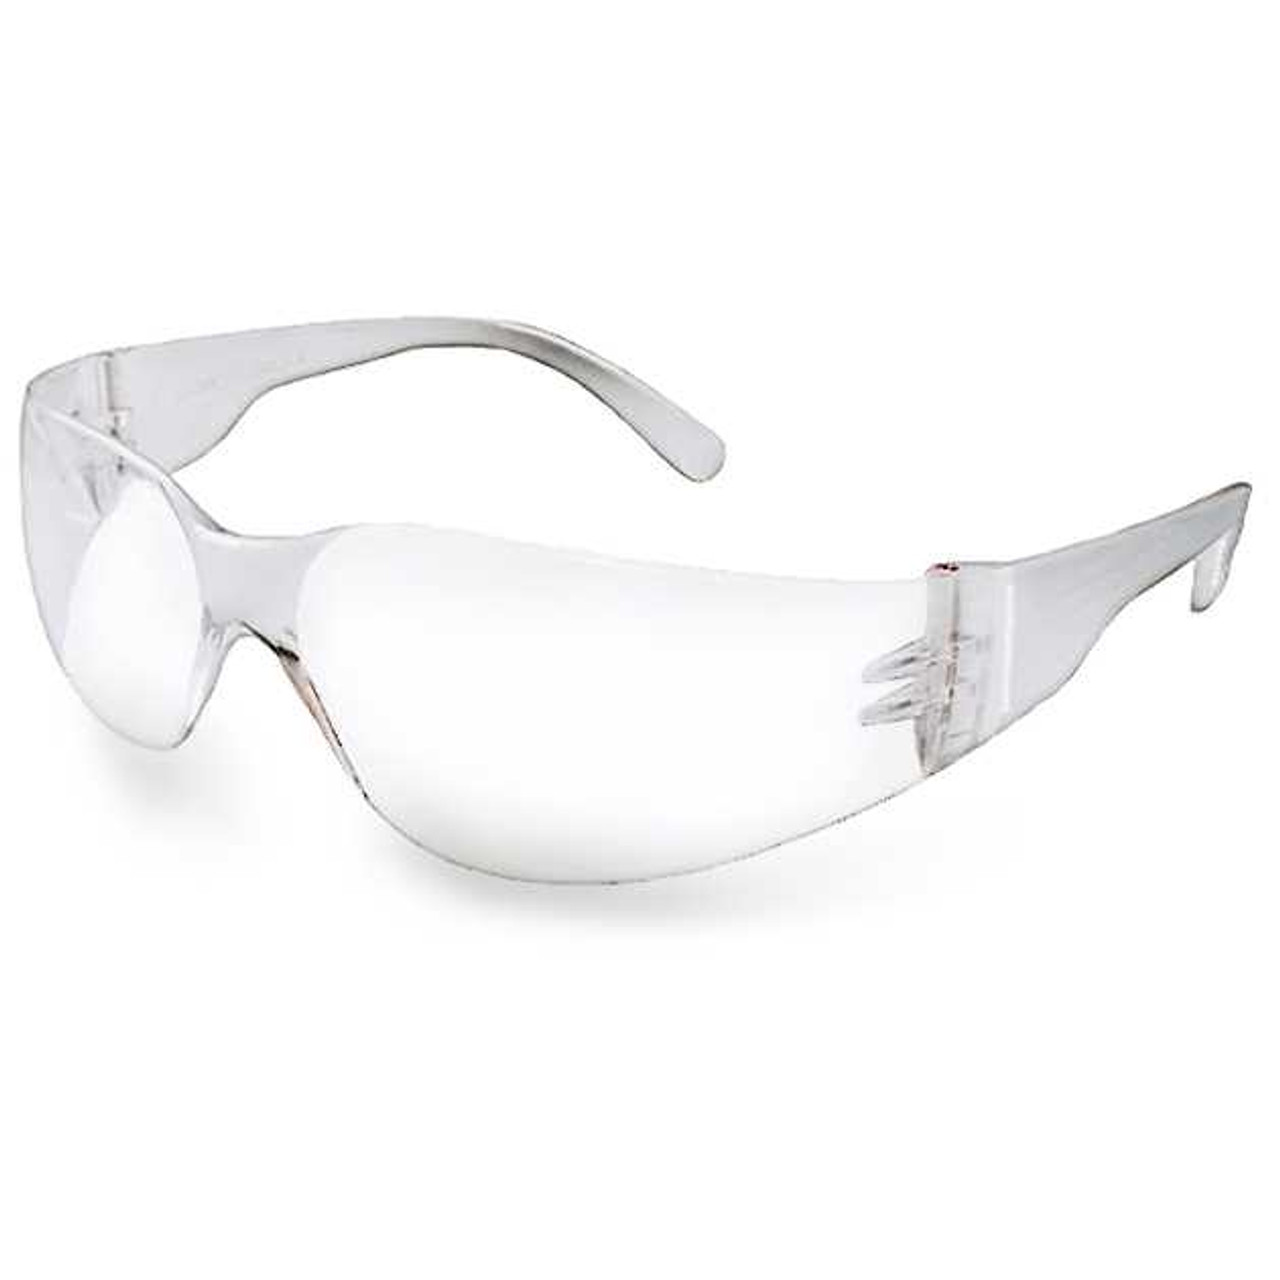 Nova™ E Series, One-Piece Lens Safety Glasses, Scratch Resistant, Available in Clear, Smoke, Amber, and Clear Anti Fog (144 pairs / case)